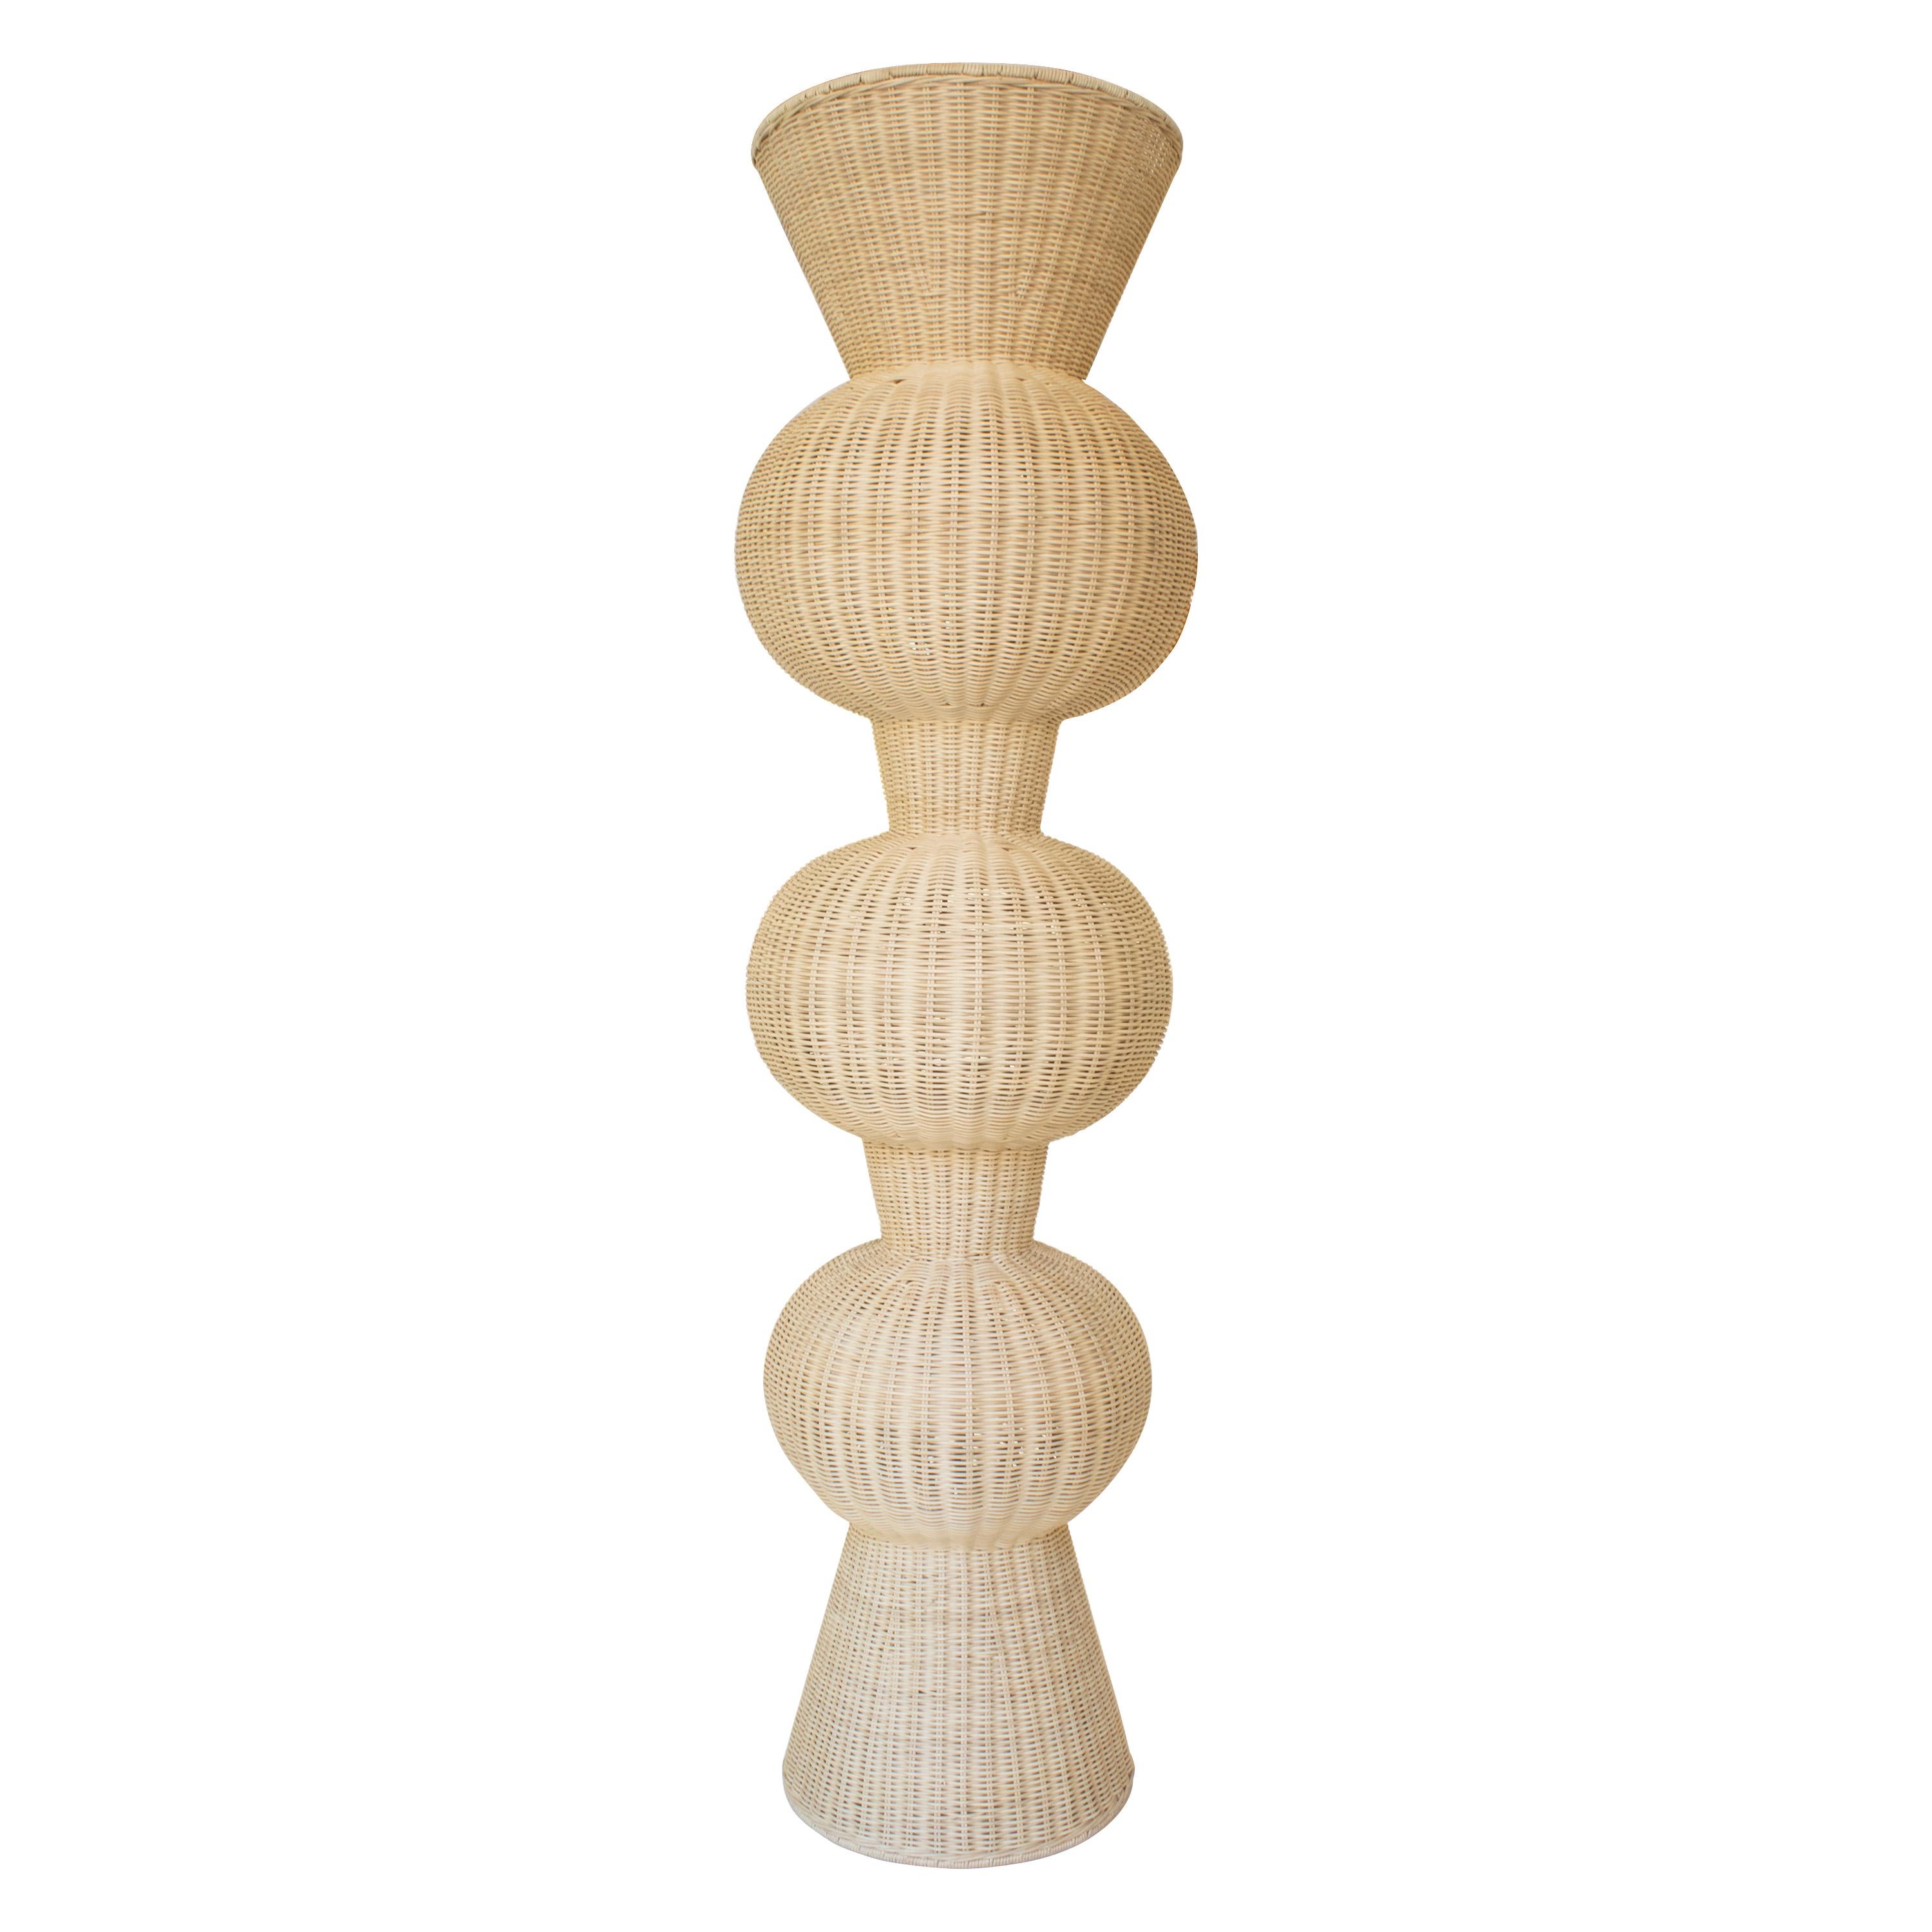 Contemporary Spanish Handcrafted floor lamp with 3-stacked ball shape globes made of wicker.